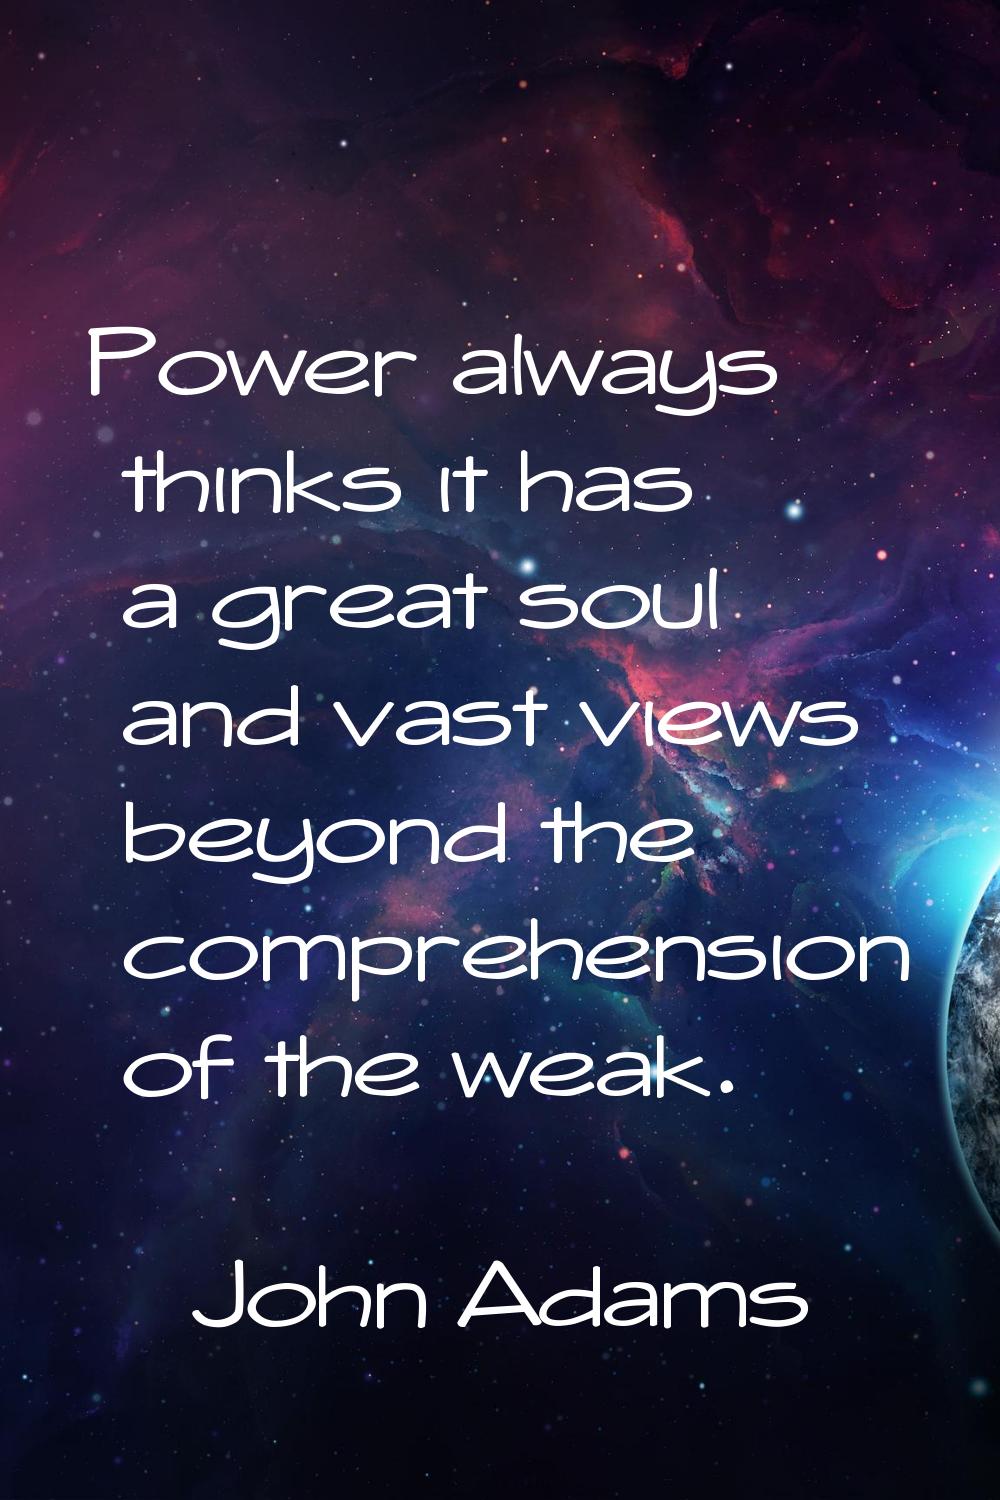 Power always thinks it has a great soul and vast views beyond the comprehension of the weak.